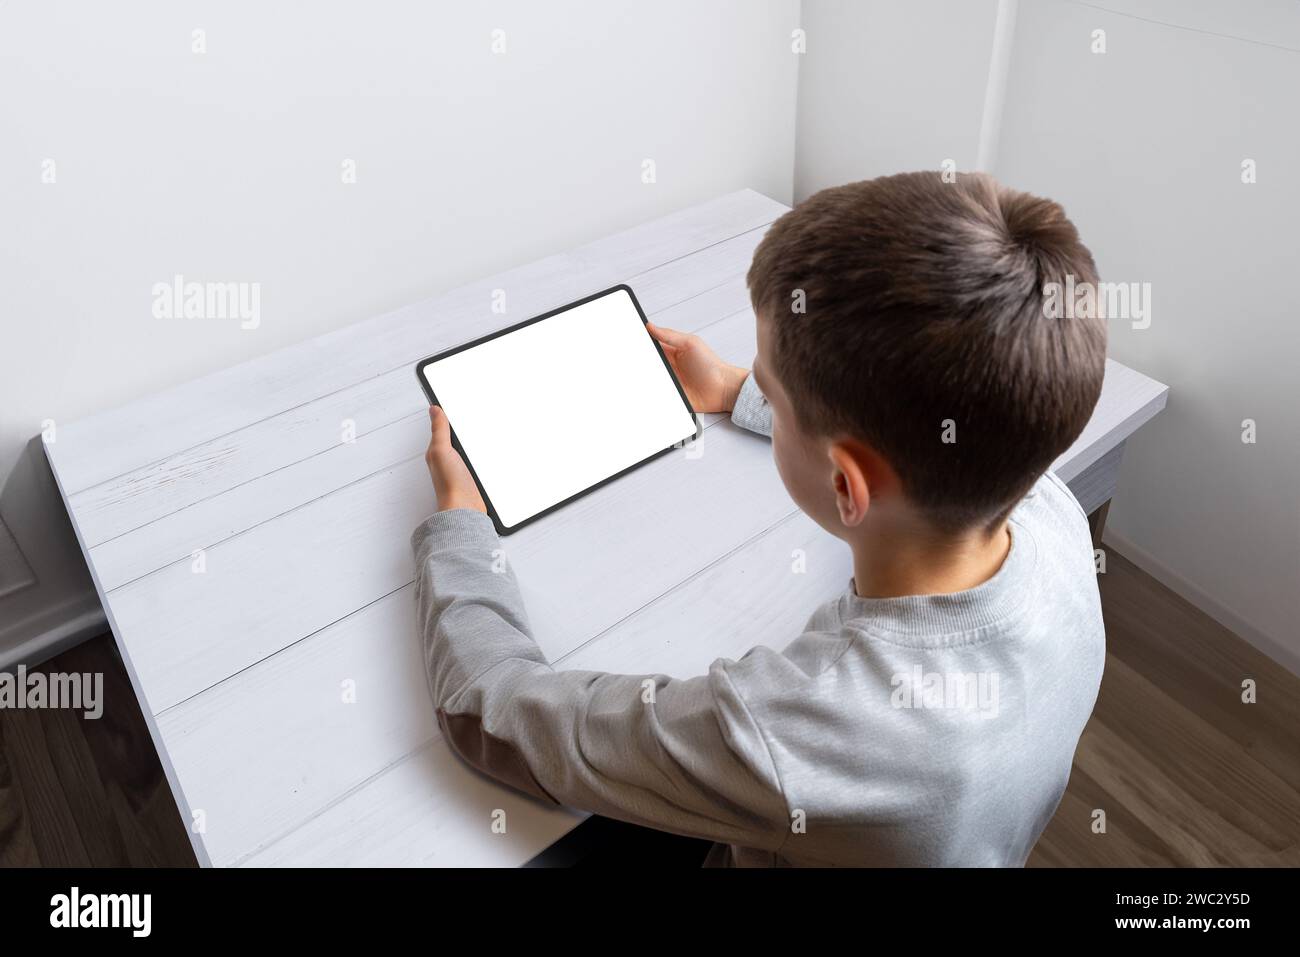 Boy hold tablet with isolated screen for game or app promotion on a tidy work desk. Perfect for showcasing digital entertainment and educational appli Stock Photo